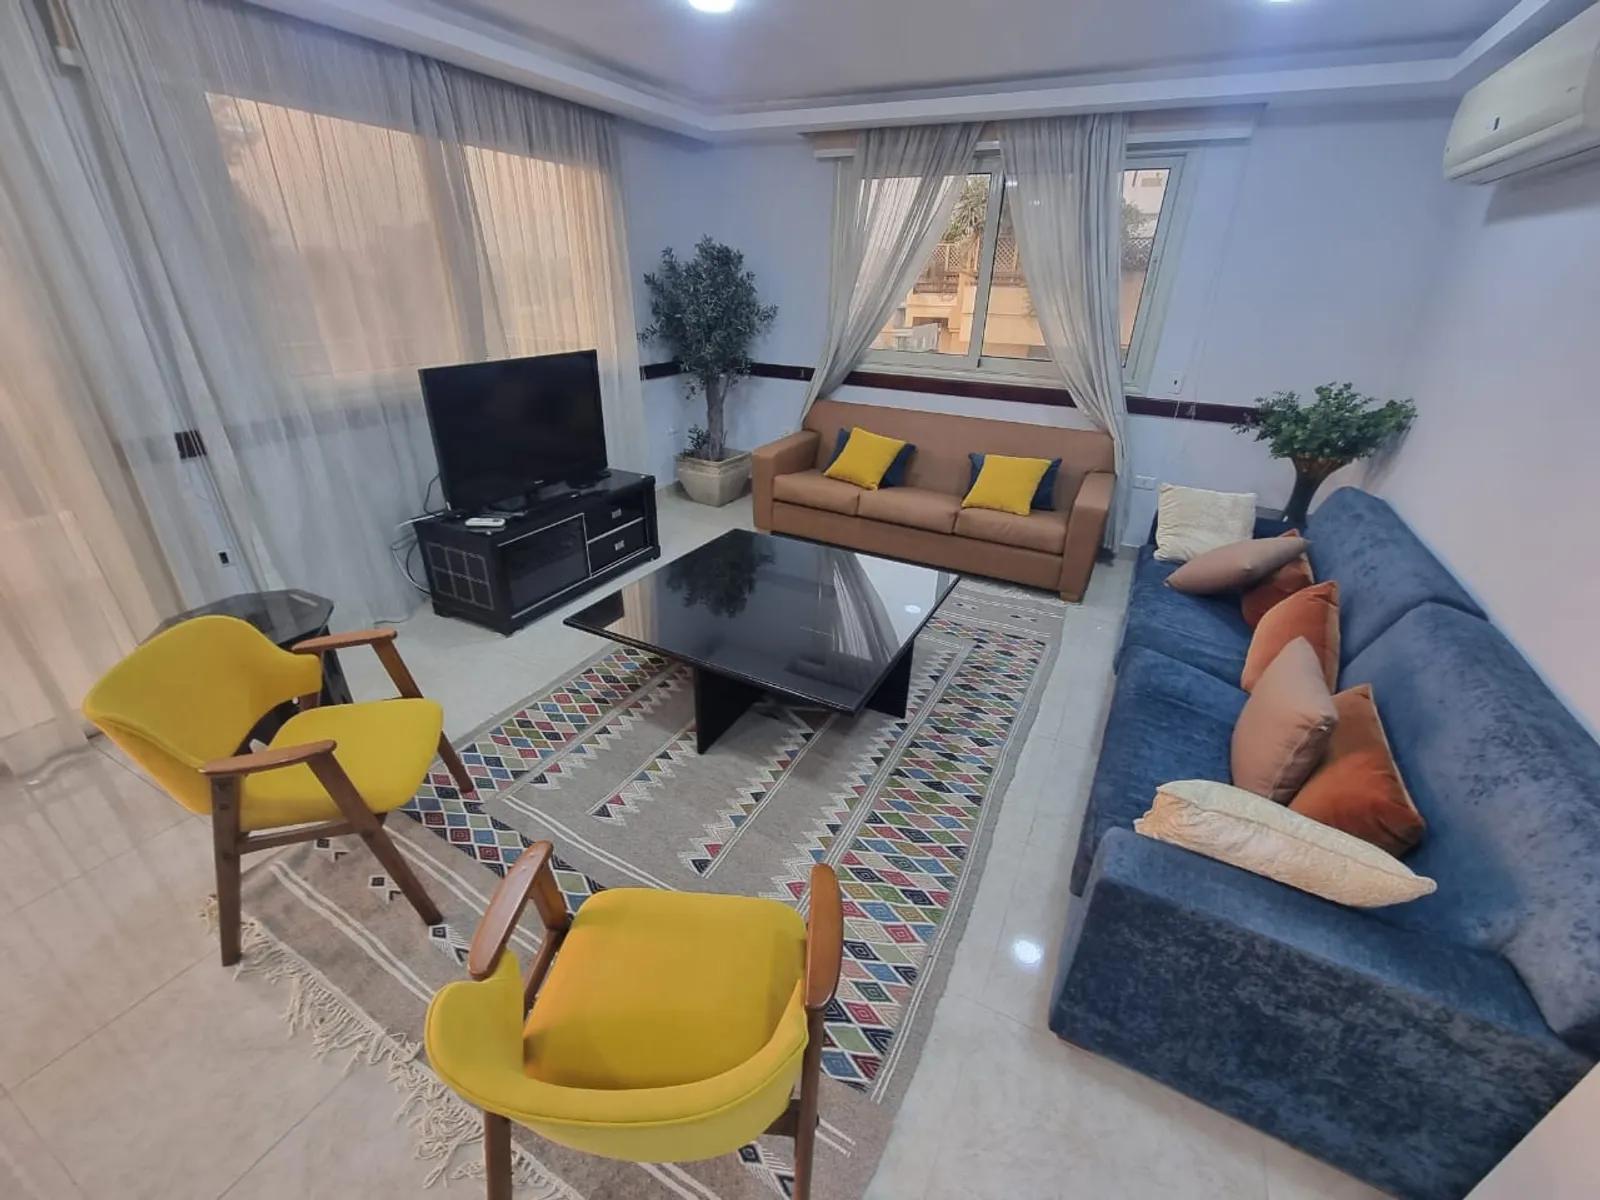 WONDERFUL PENTHOUSE FOR RENT WITH LARGE TERRACE LOCATED IN DEGLA EL MAADI - #4945 - Modern furnished